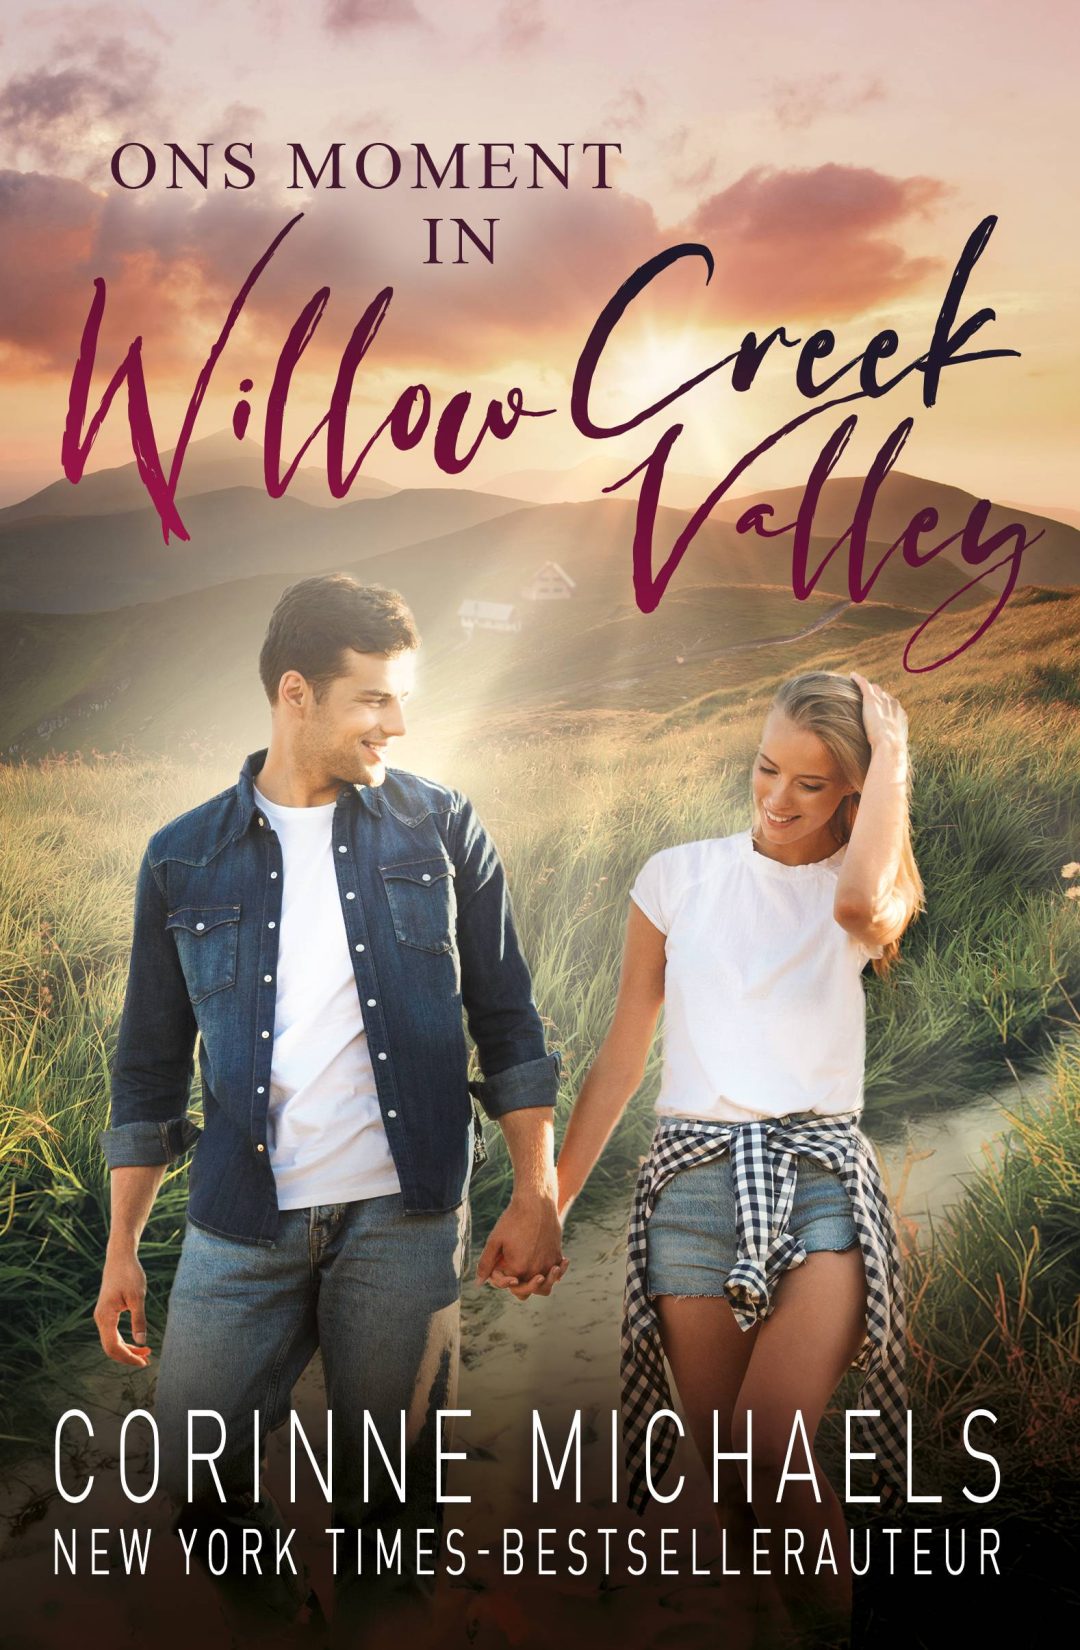 Ons moment in Willow Creek Valley